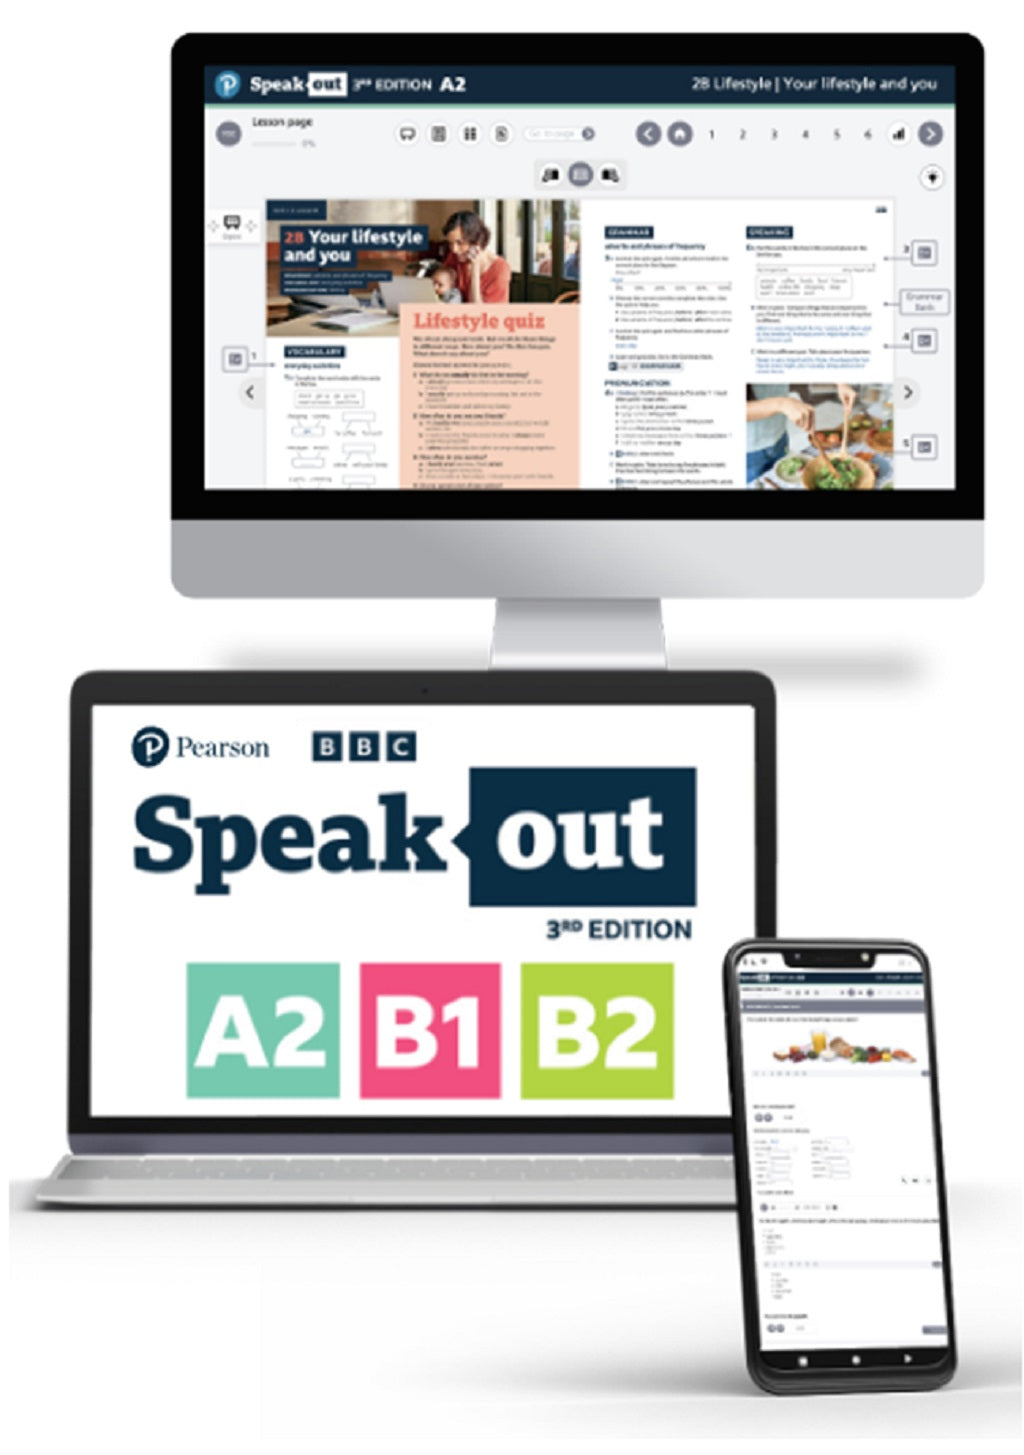 Speakout 3rd edition - A2, B1, B2 Multi-level licence, ebook + online practice 1 year licence